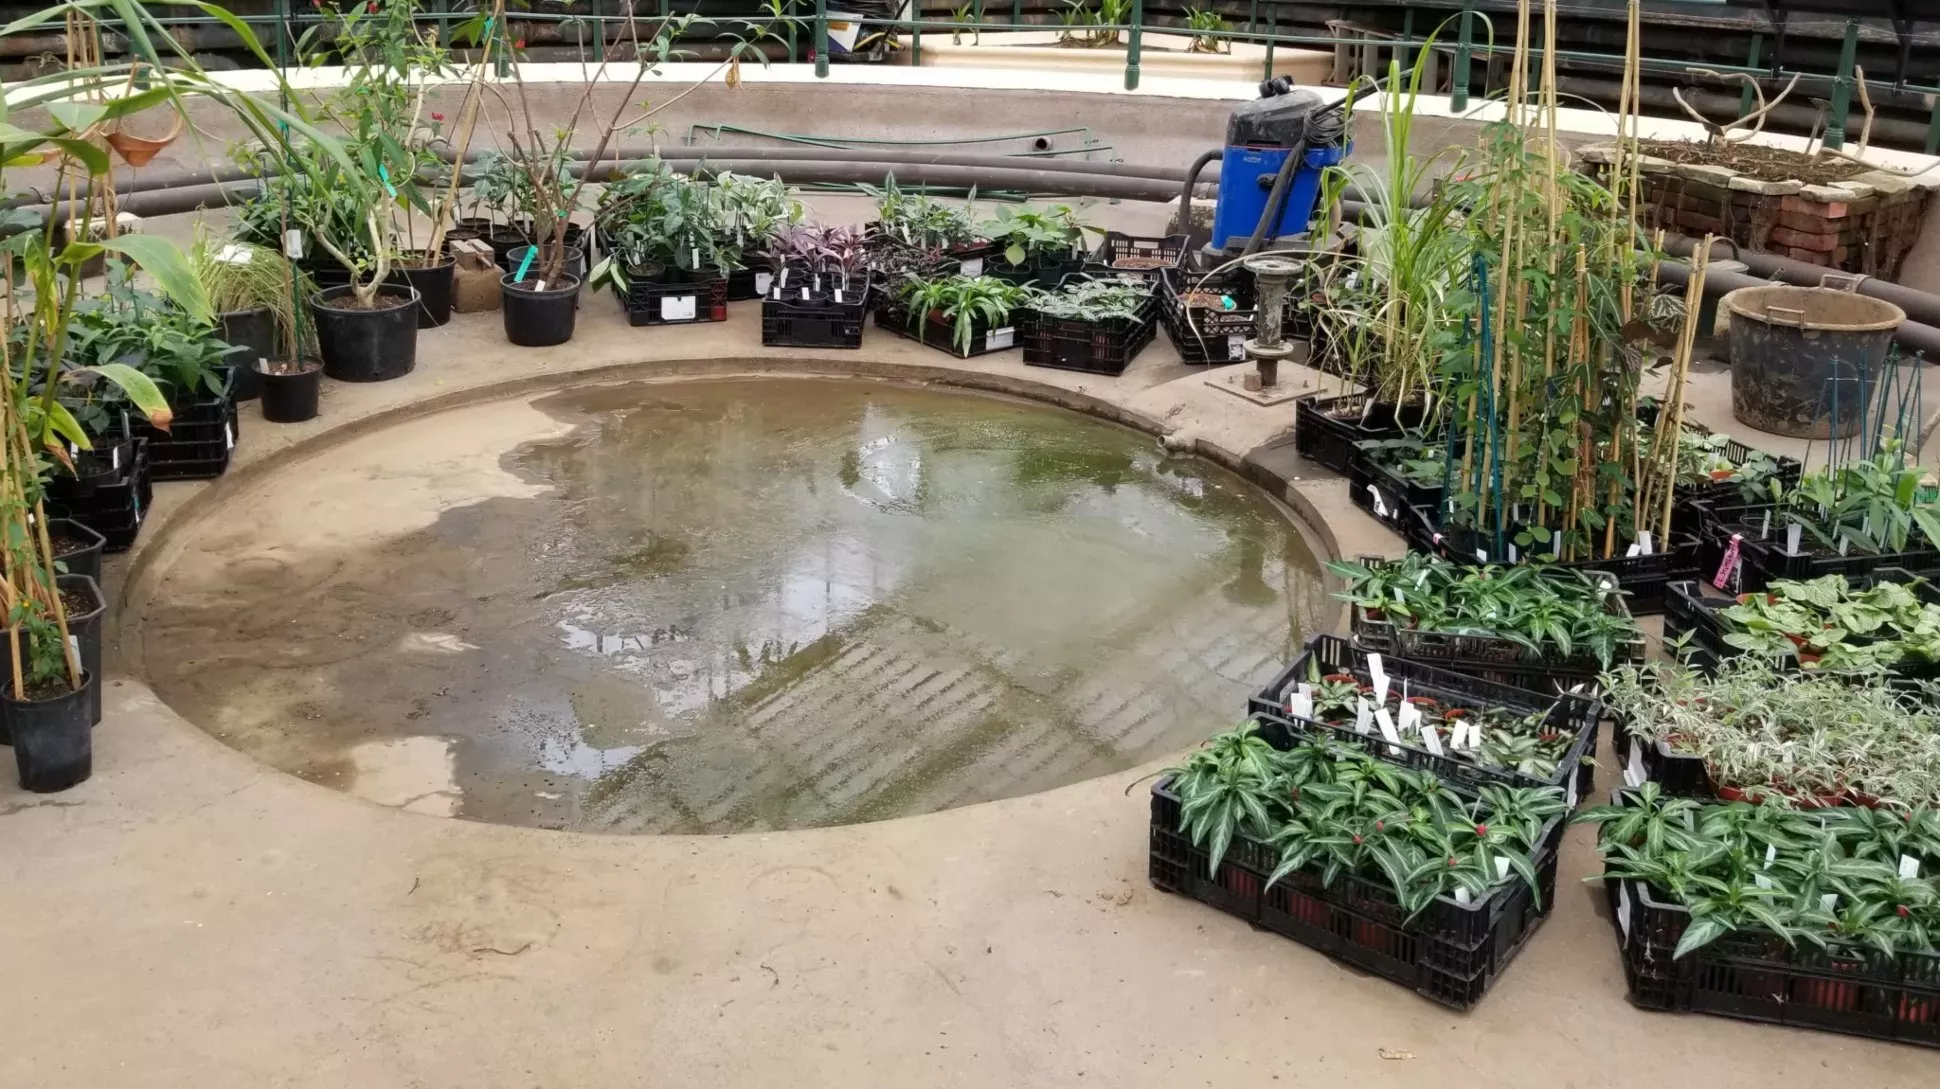 A large number of plants in pots around a small puddle of water